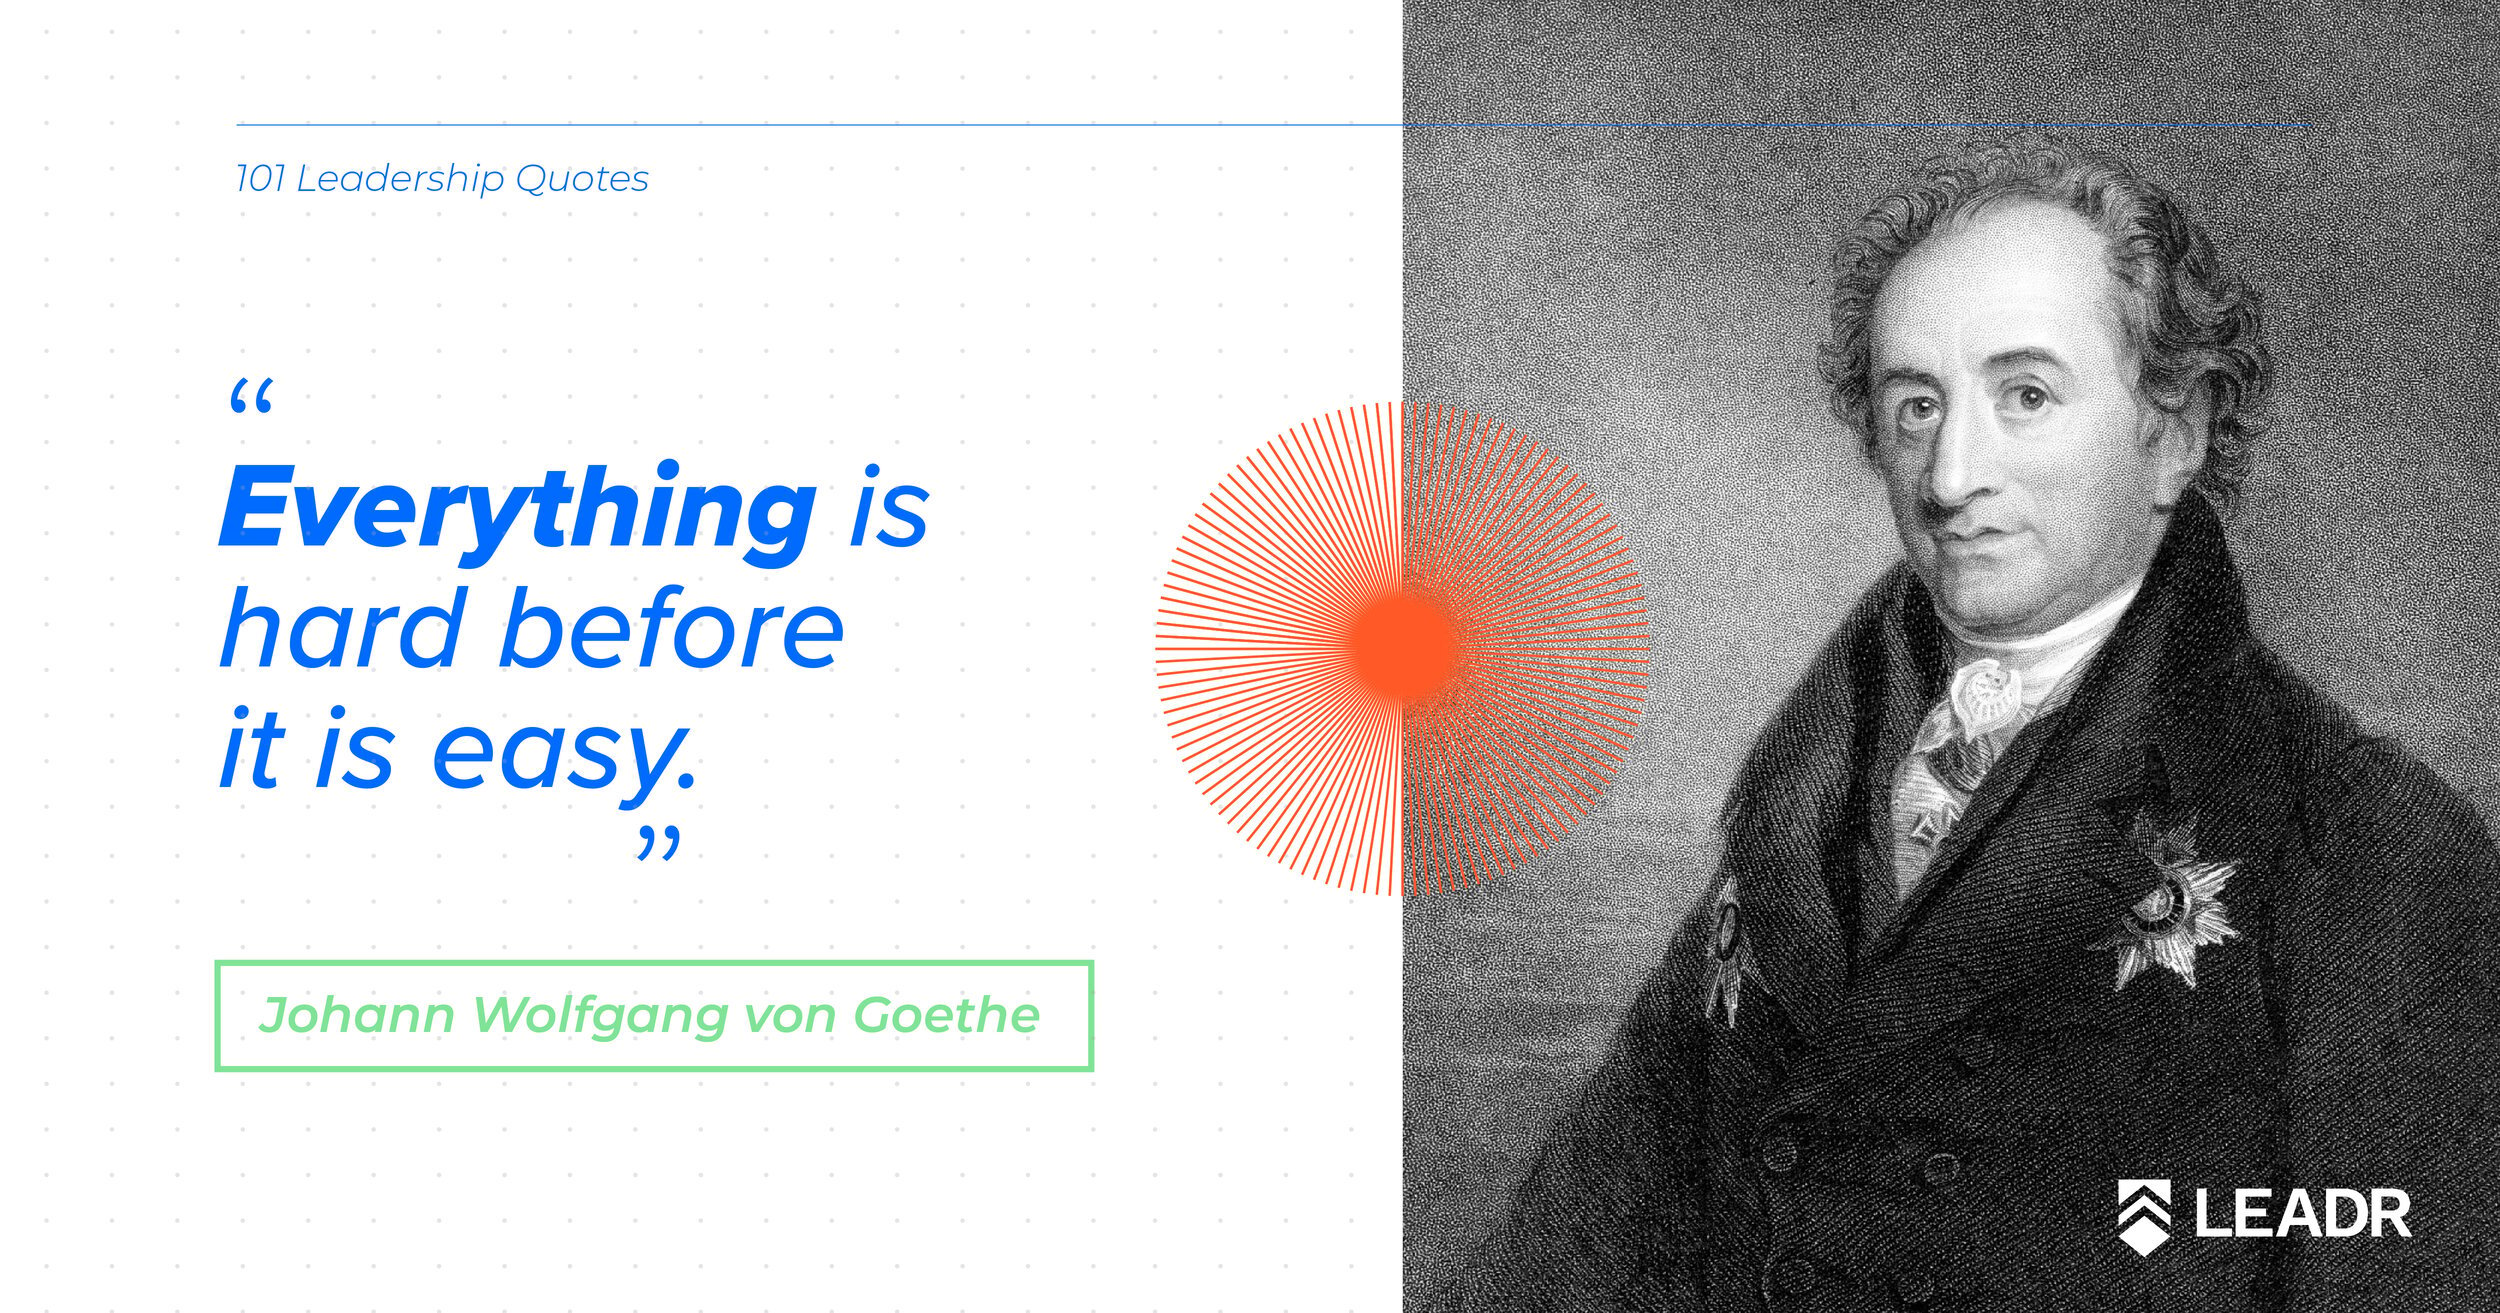 Royalty free downloadable leadership quotes - Johann Wolfgang von Goethe